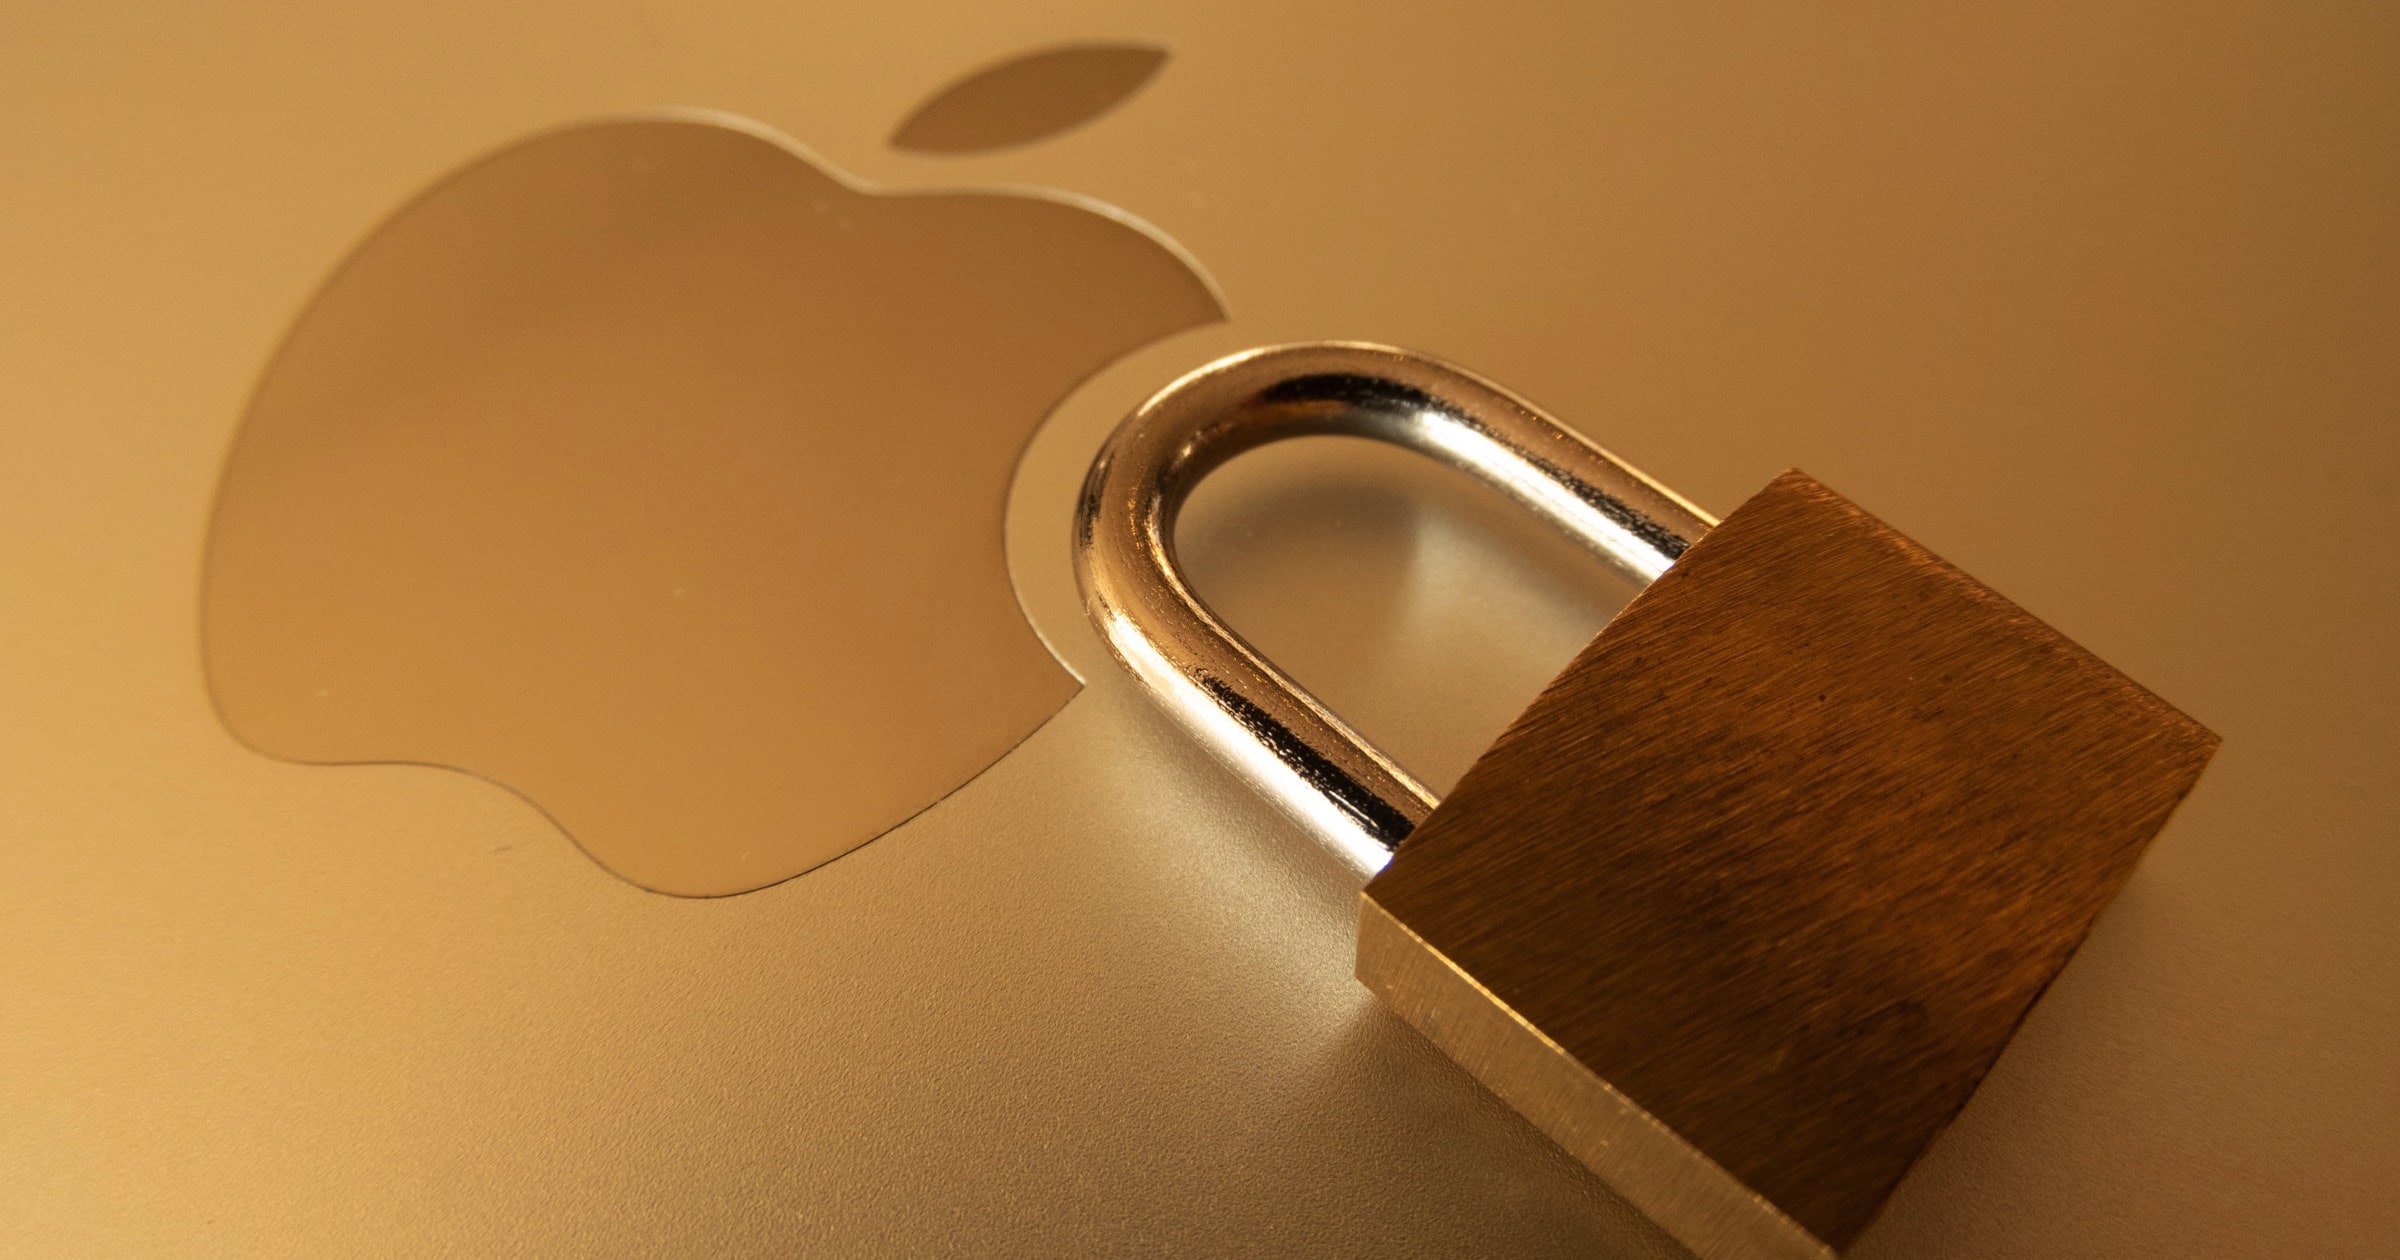 apple security with padlock